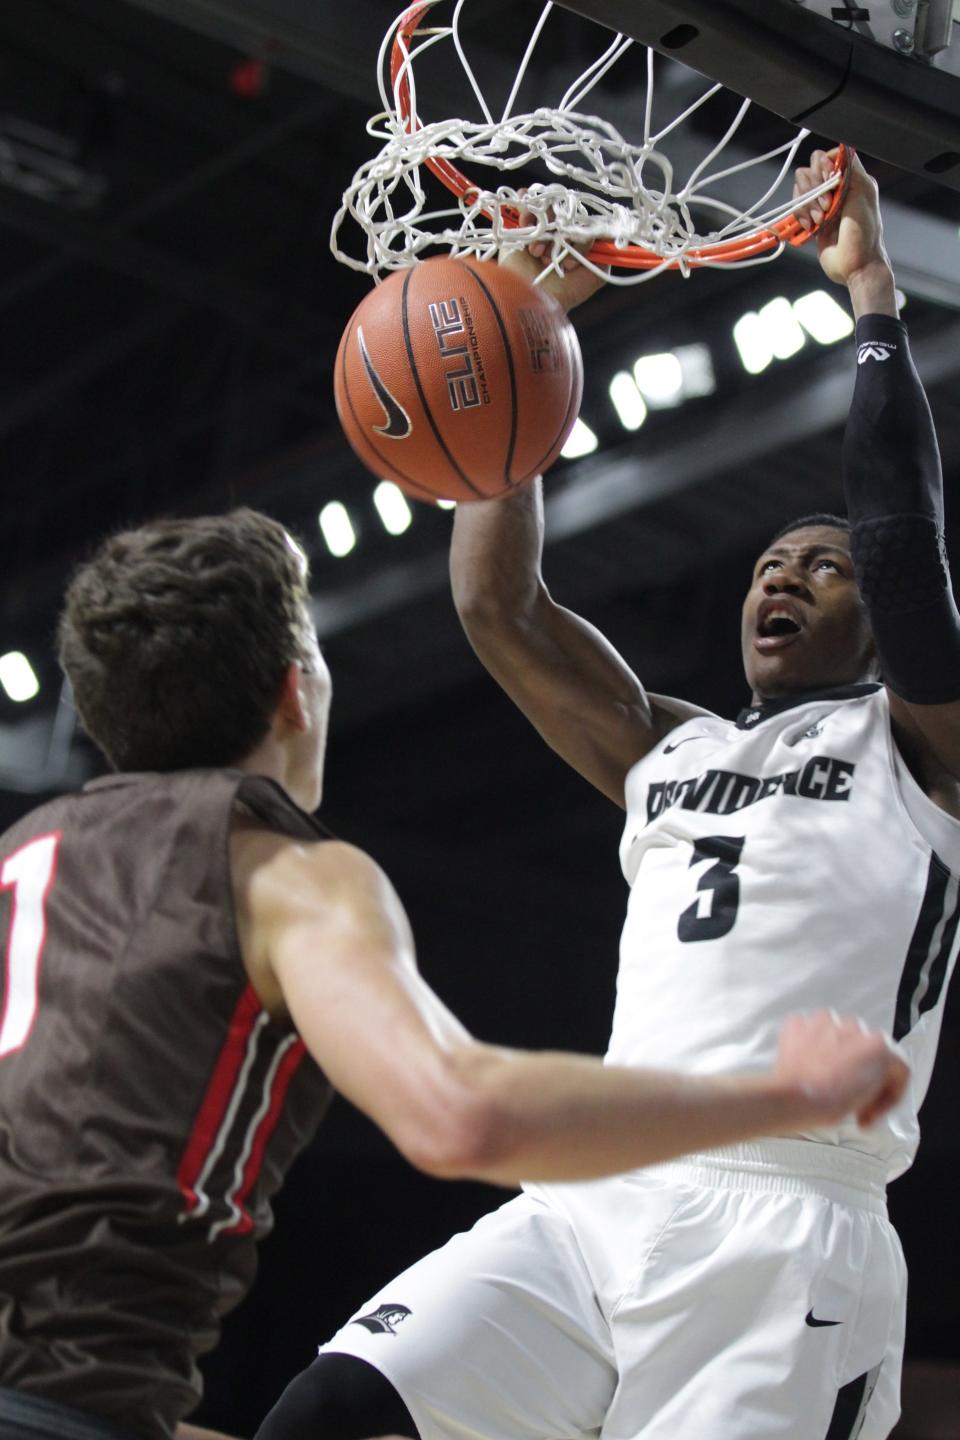 PC's Kris Dunn dunks the ball as Brown's Travis Fuller is late to cover during a game in 2015. The two teams will play each other in December after a long hiatus.